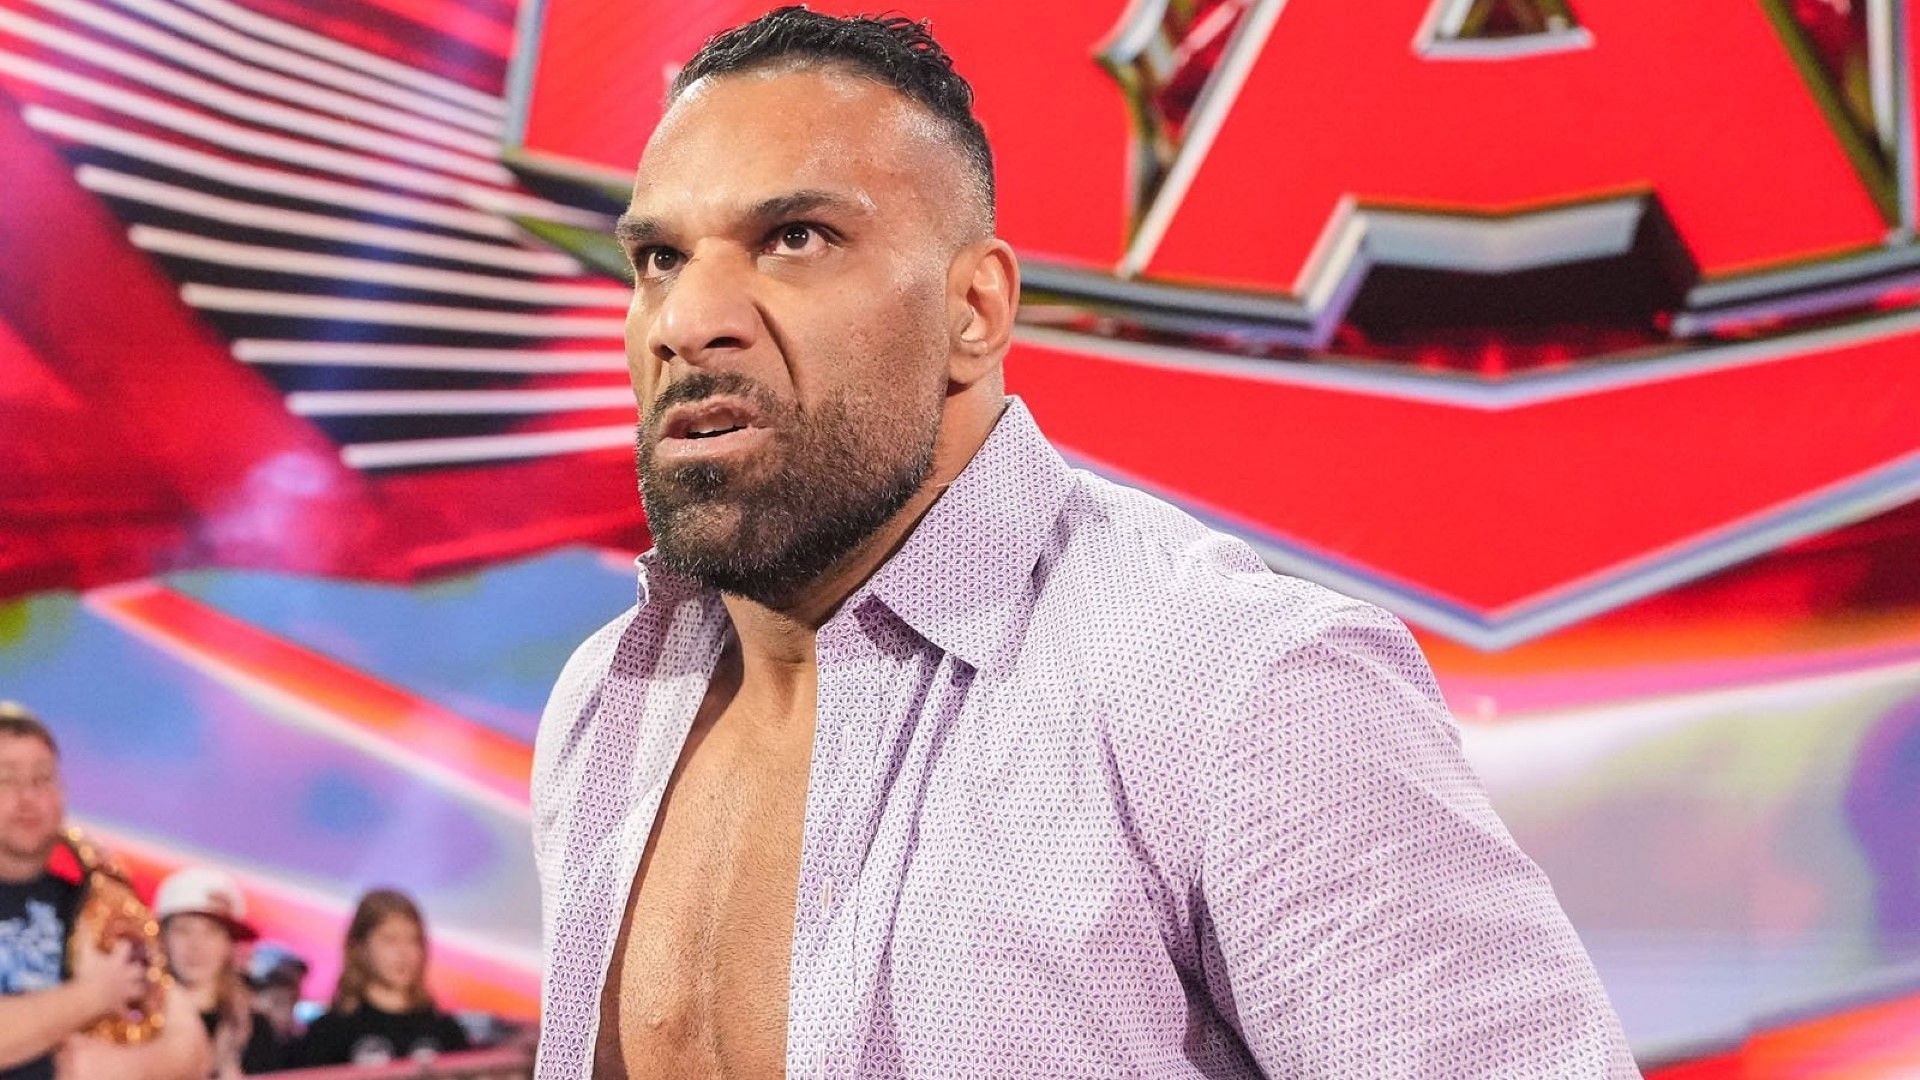 Jinder Mahal stands tall on WWE RAW